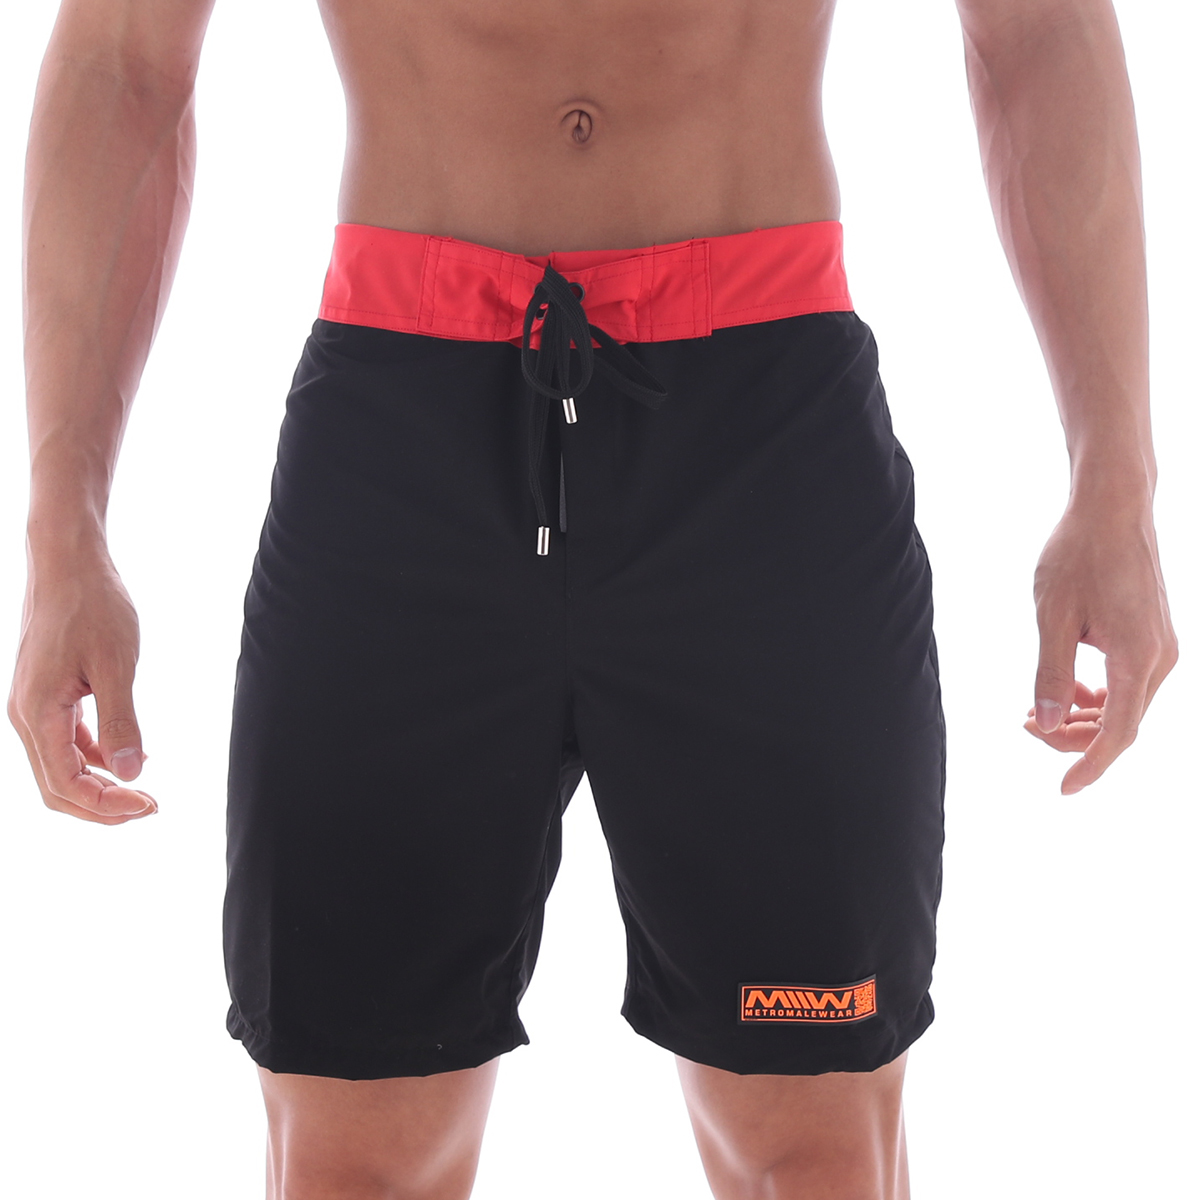 [M2W] Physique Board Short Red Stripe (4706-22)